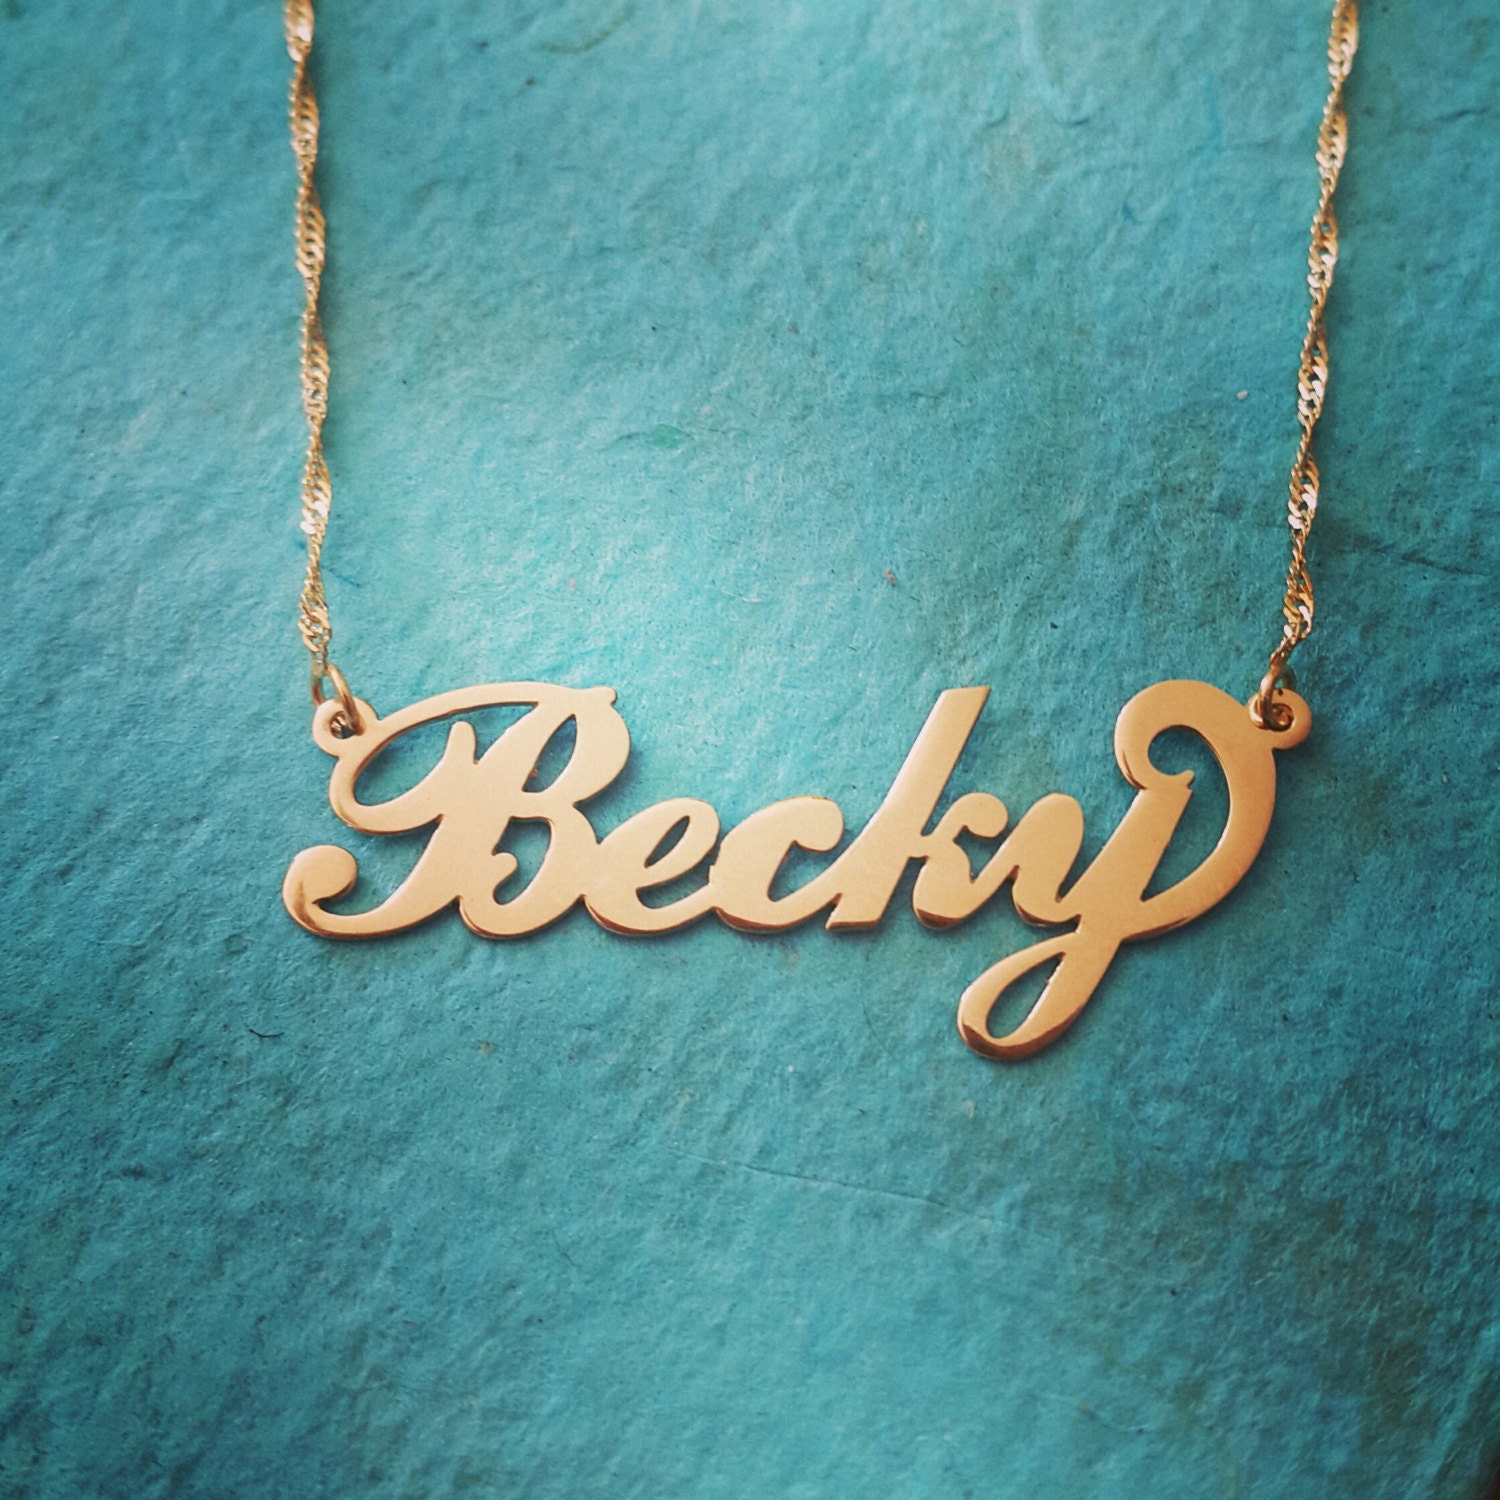 14k Gold Name Necklace Personalized Name Chain Solid 14k